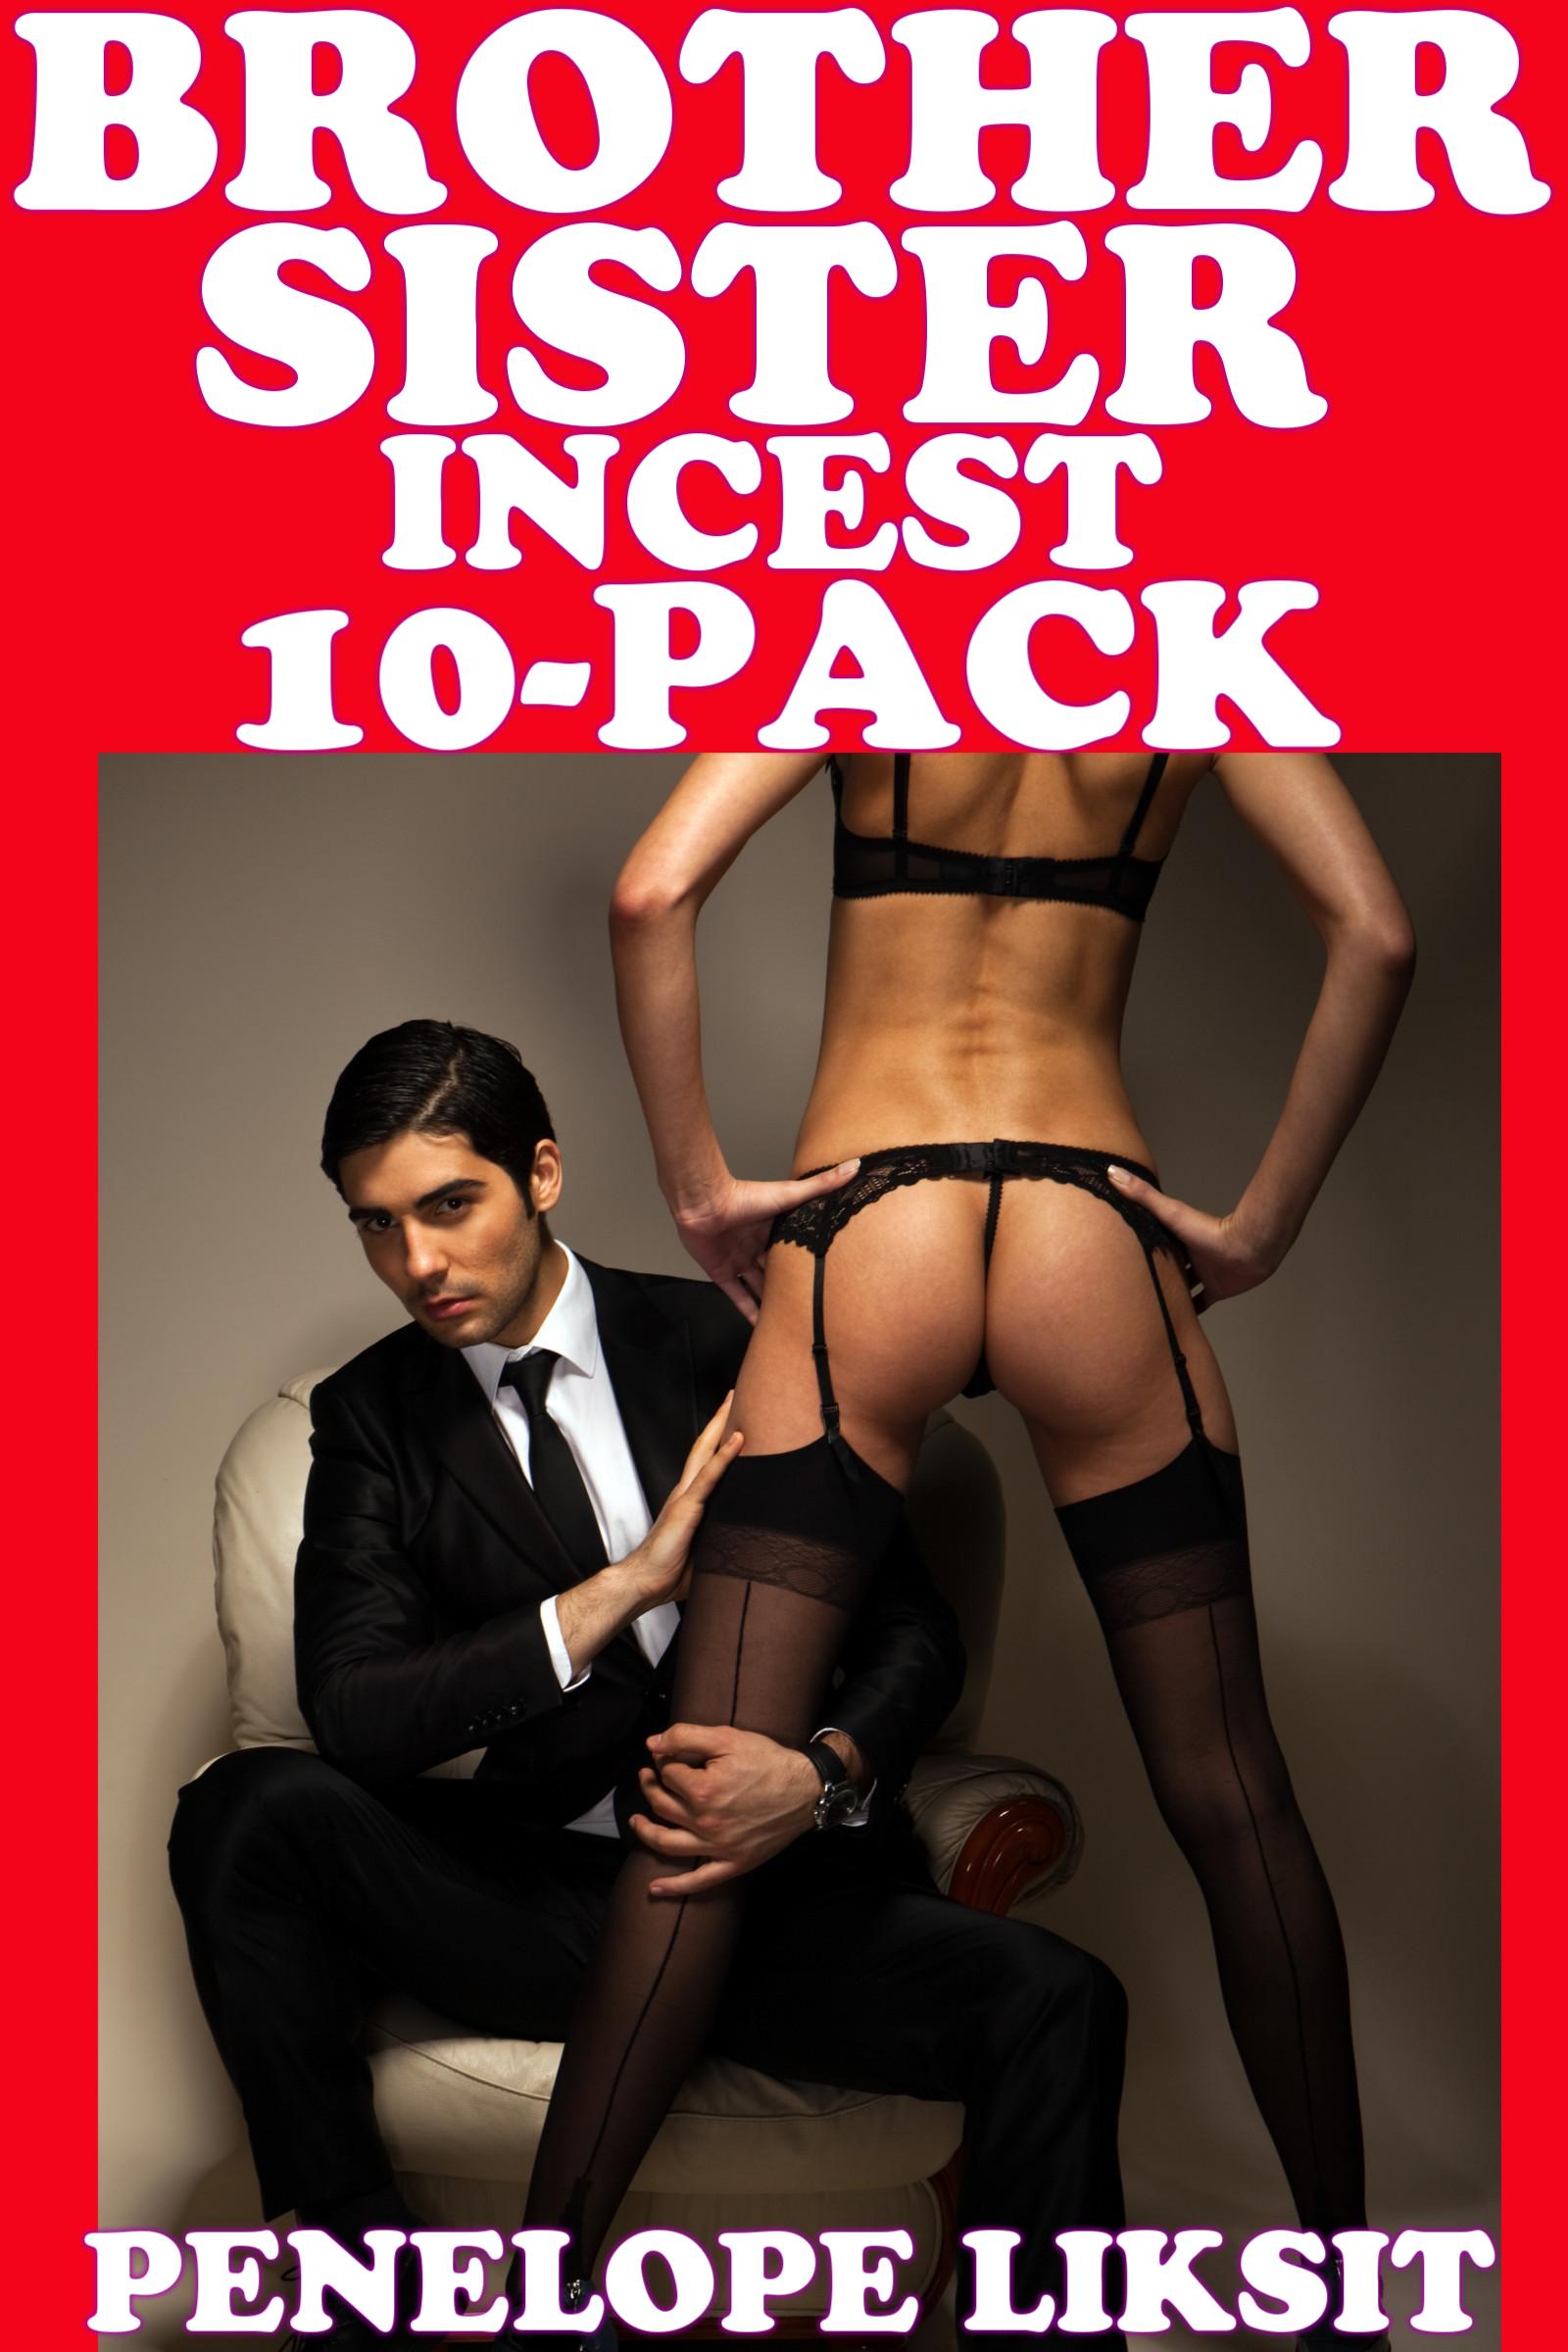 Brother Sister Incest 10-Pack, an Ebook by Penelope Liksit